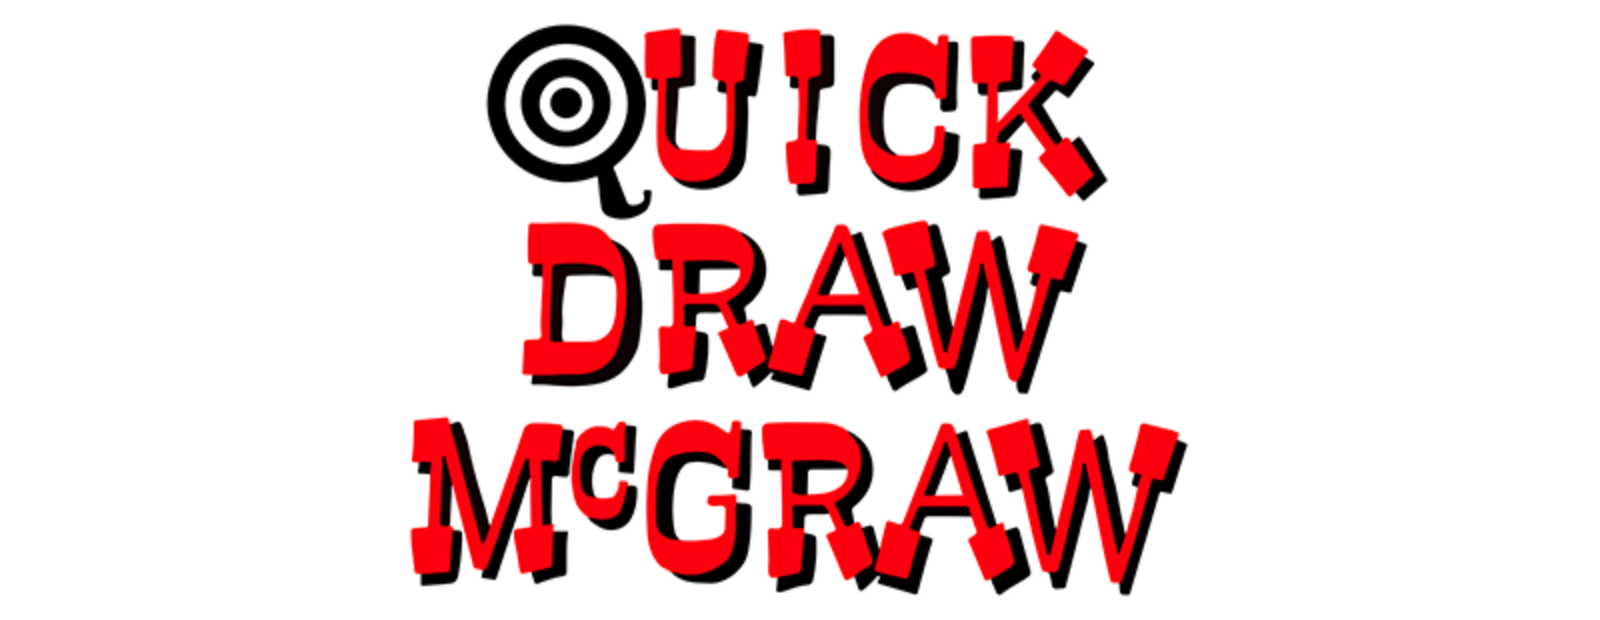 The Quick Draw McGraw Show 